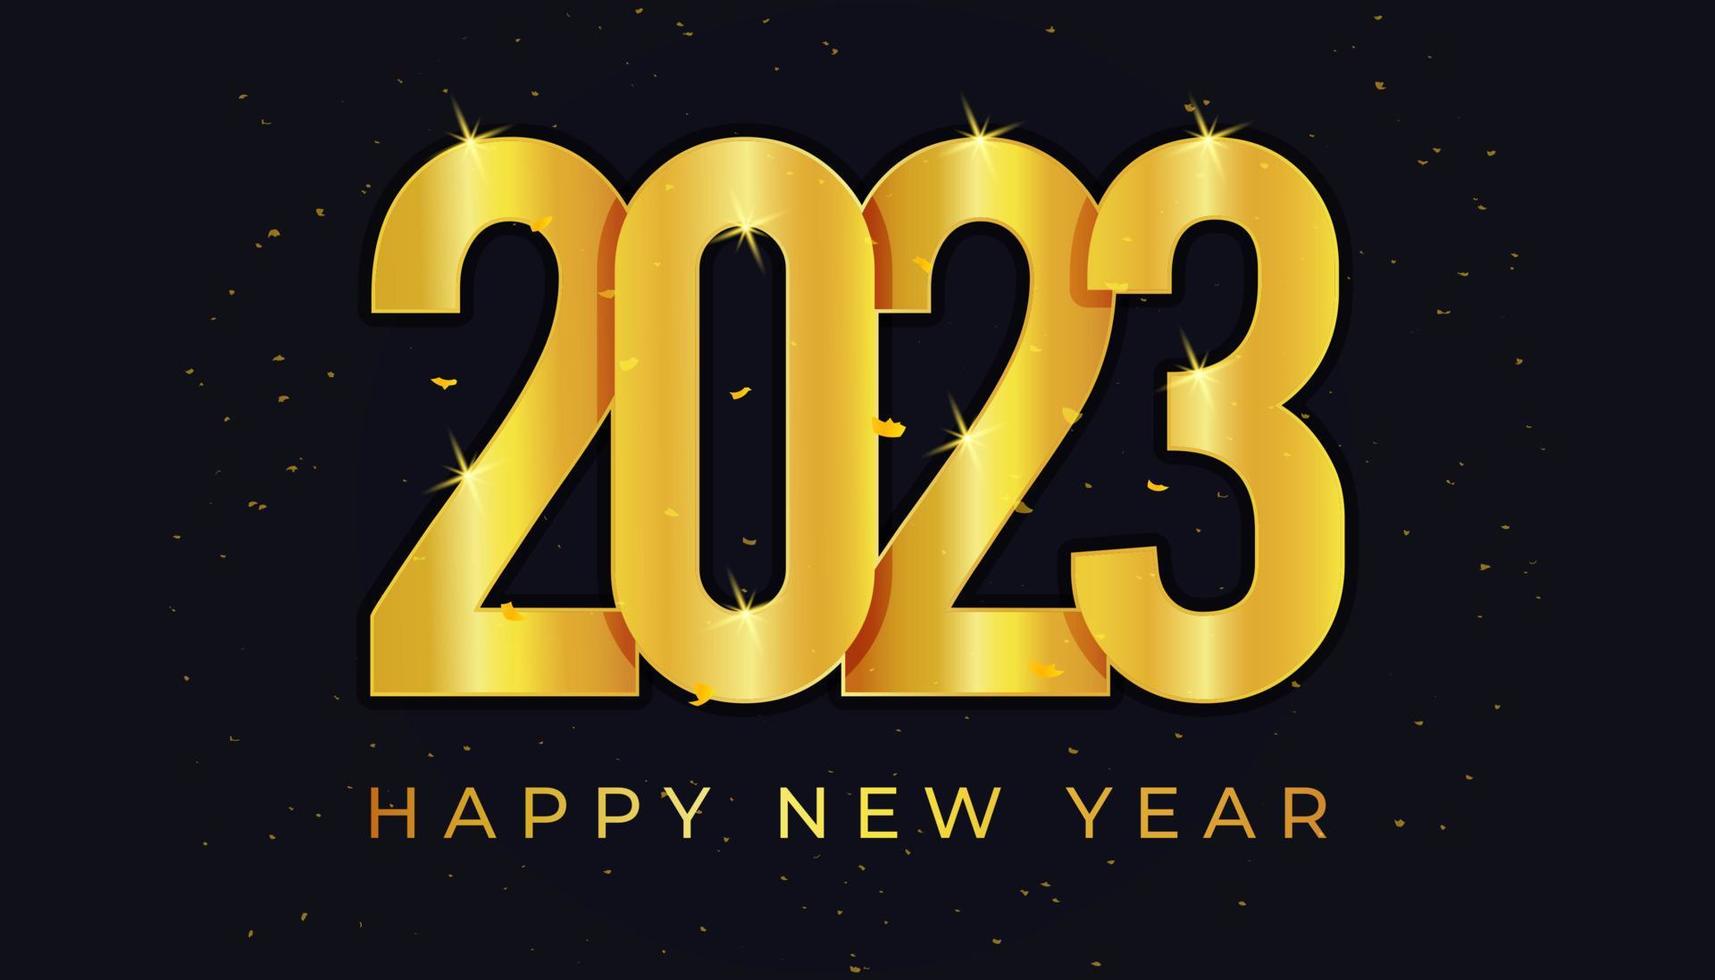 Happy New Year 2023 horizontal banner with golden color and confetti illustration on isolated background vector